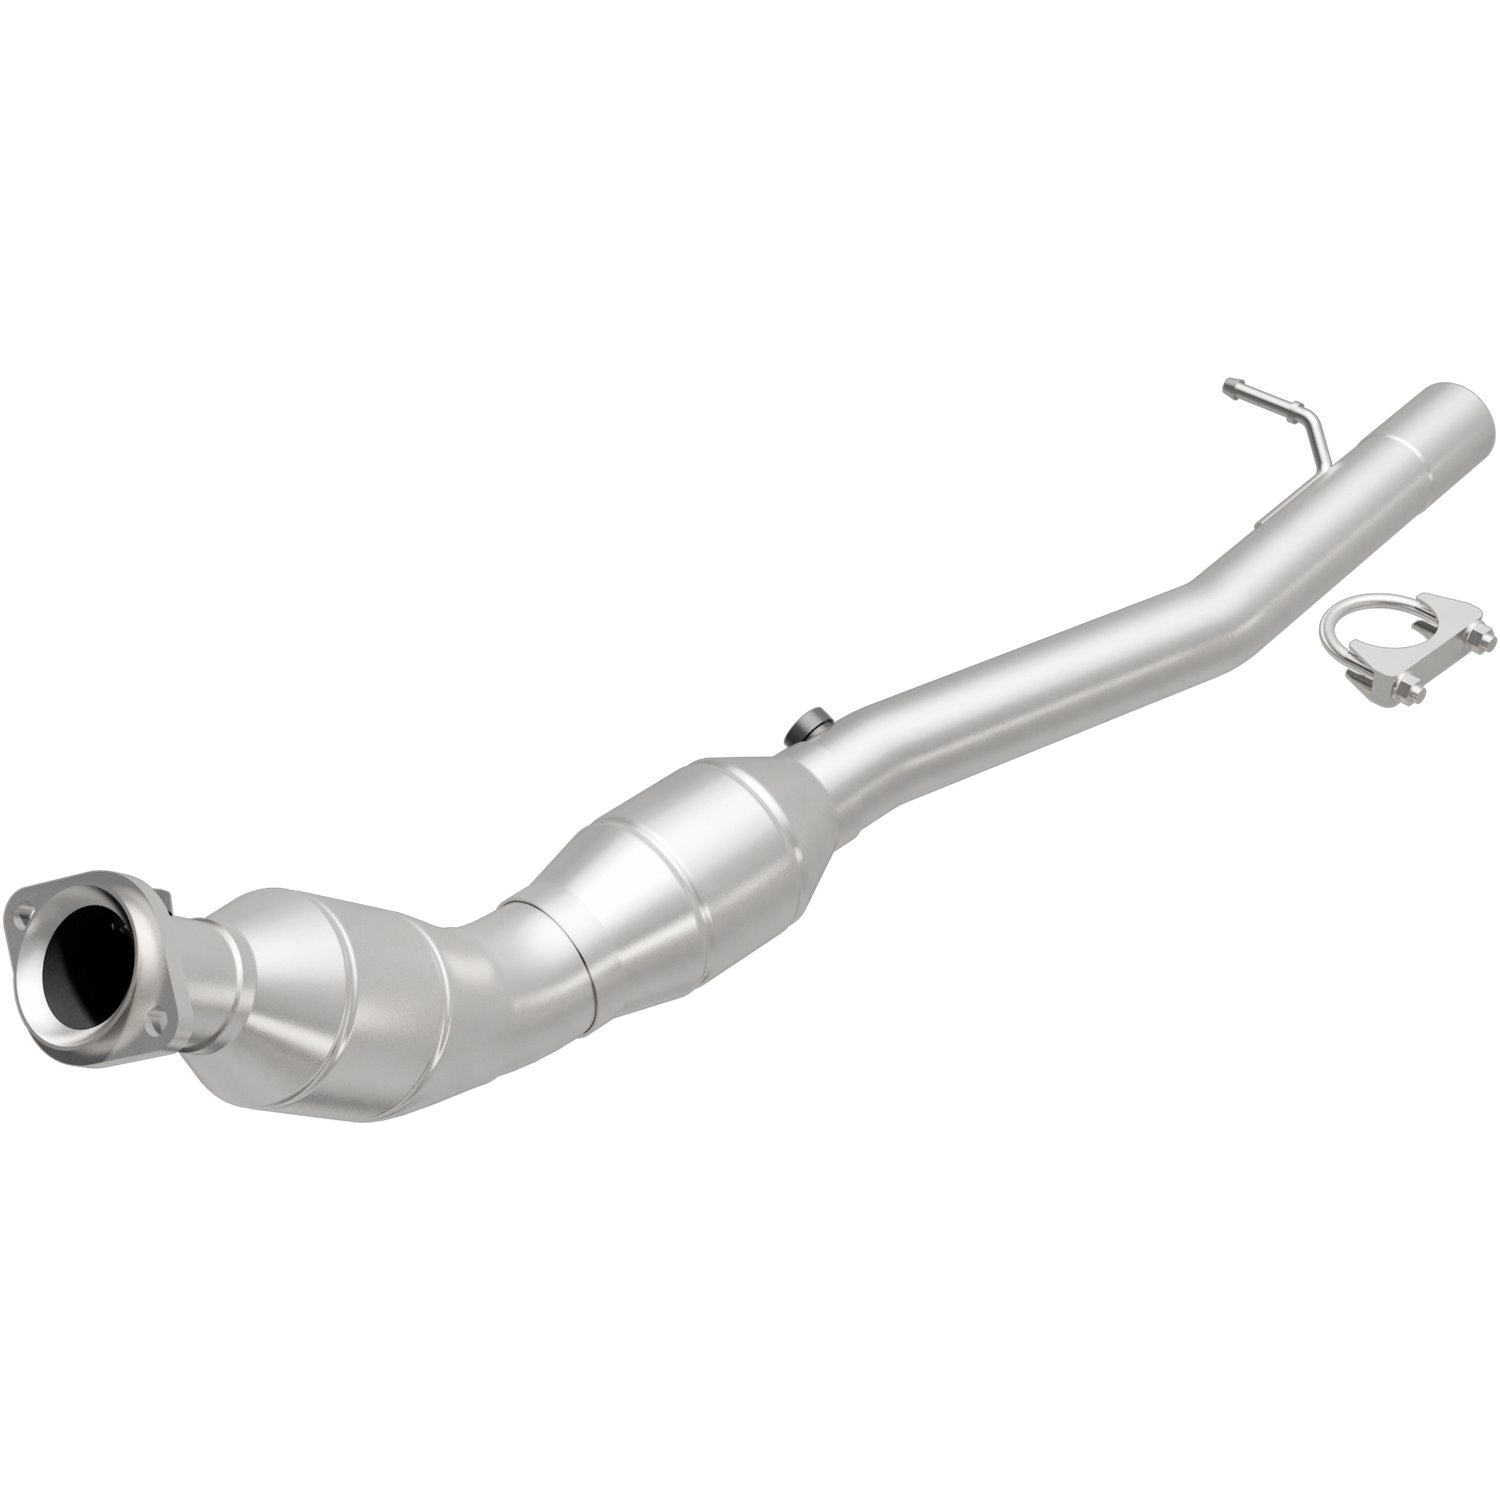 2006 Land Rover Range Rover OEM Grade Federal / EPA Compliant Direct-Fit Catalytic Converter